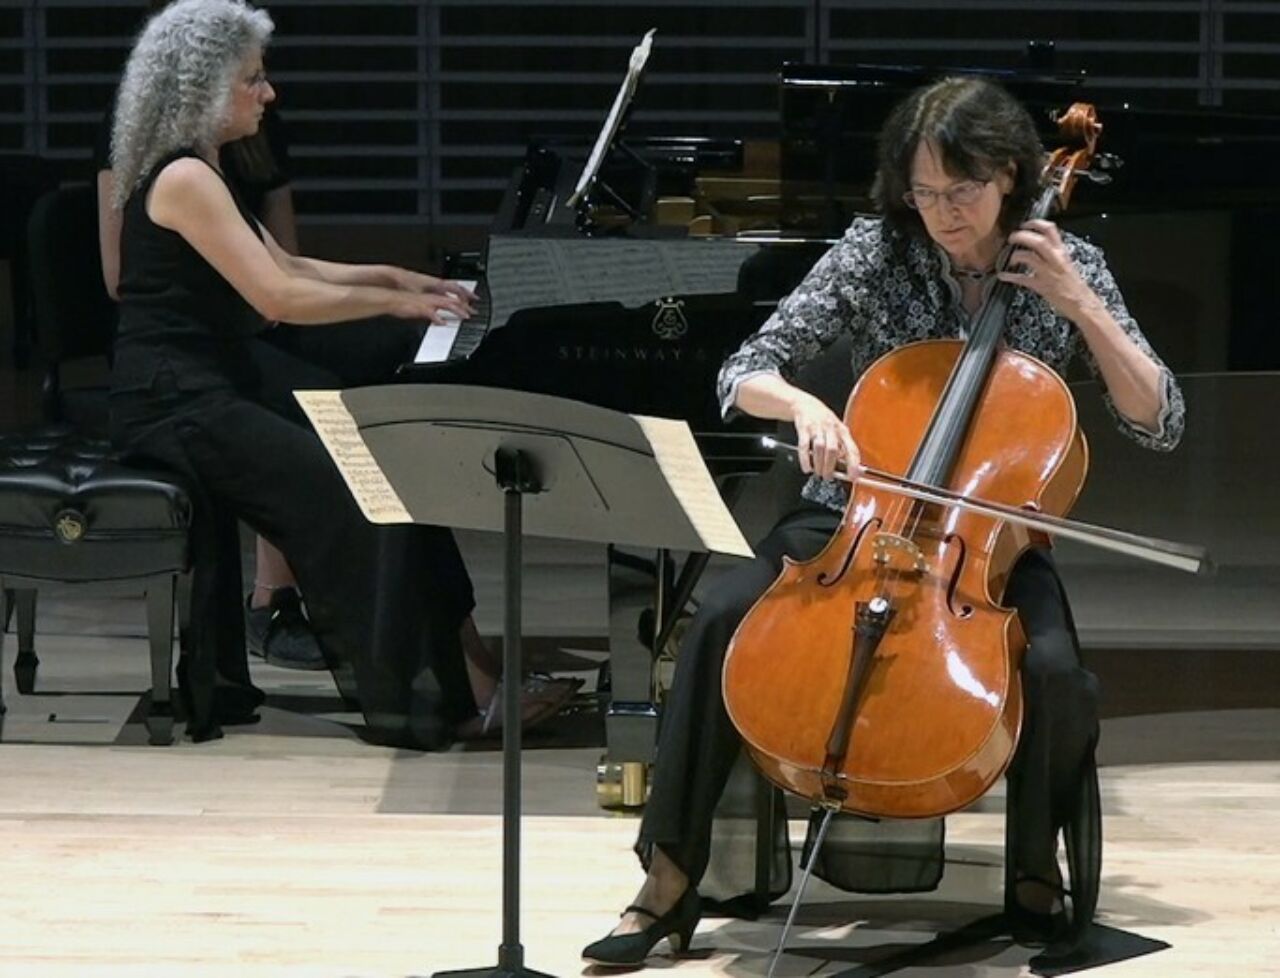 A cellist and a pianist perform on stage in the Penn State Recital Hall as part of the 2019 Penn's Woods Music Festival.